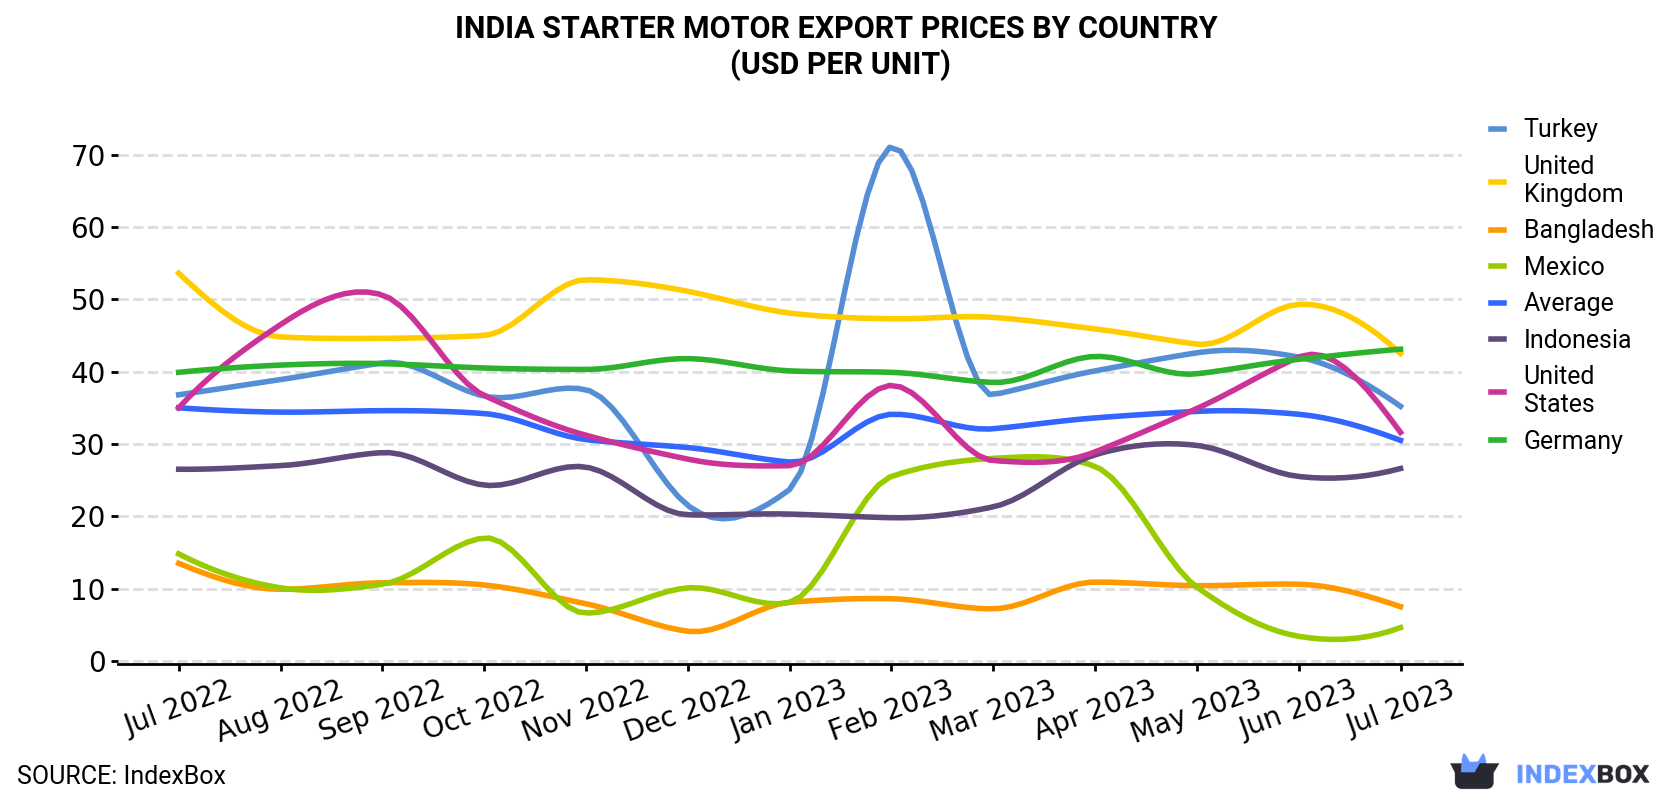 India Starter Motor Export Prices By Country (USD Per Unit)